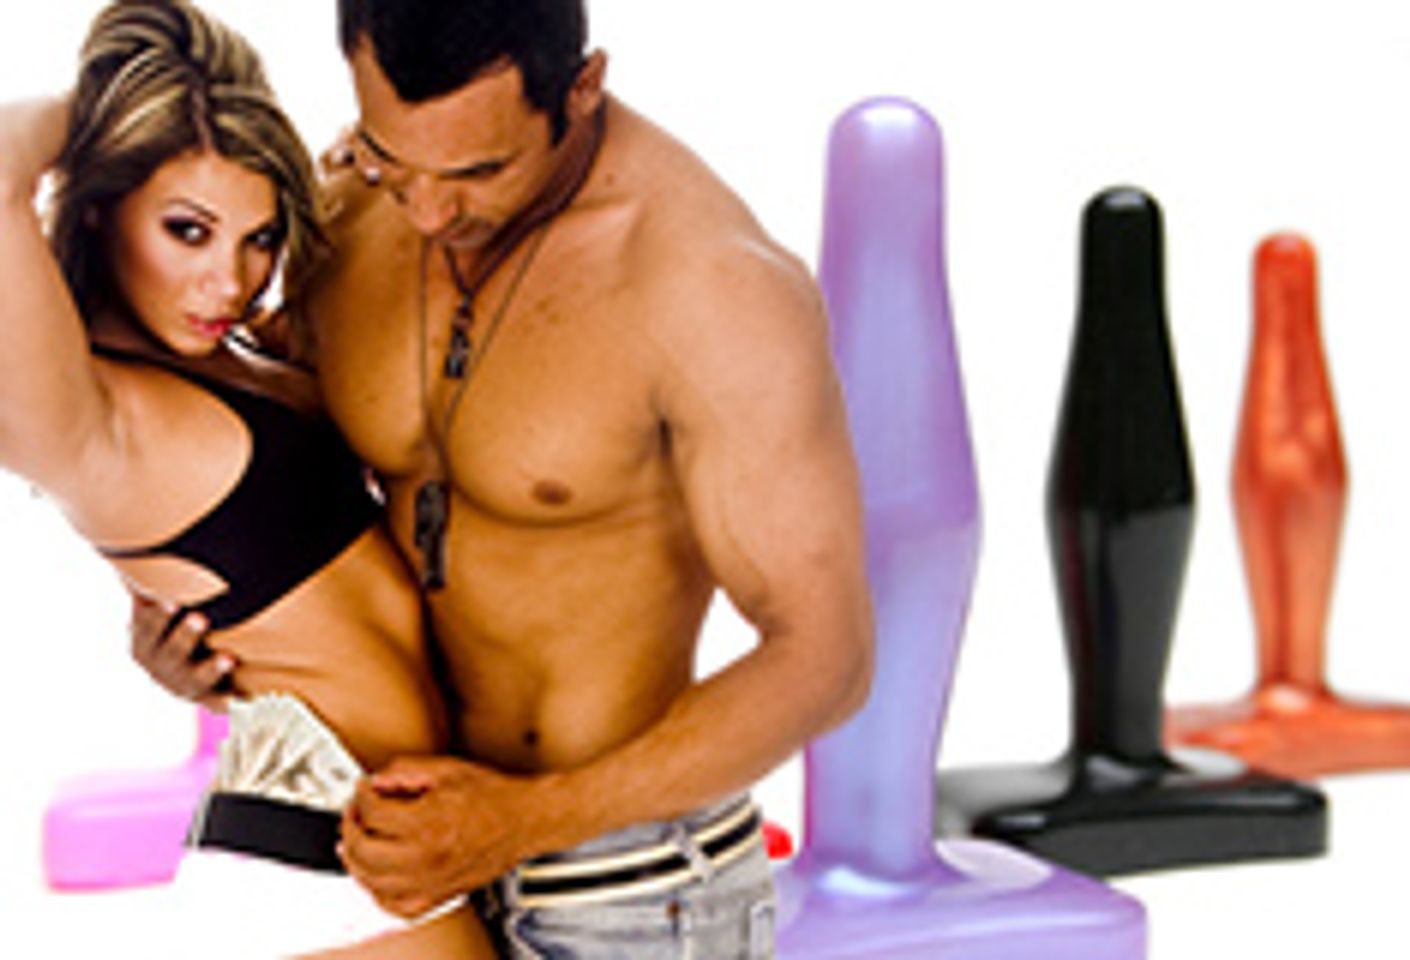 Tantus Offers Discount for Prepaid Orders